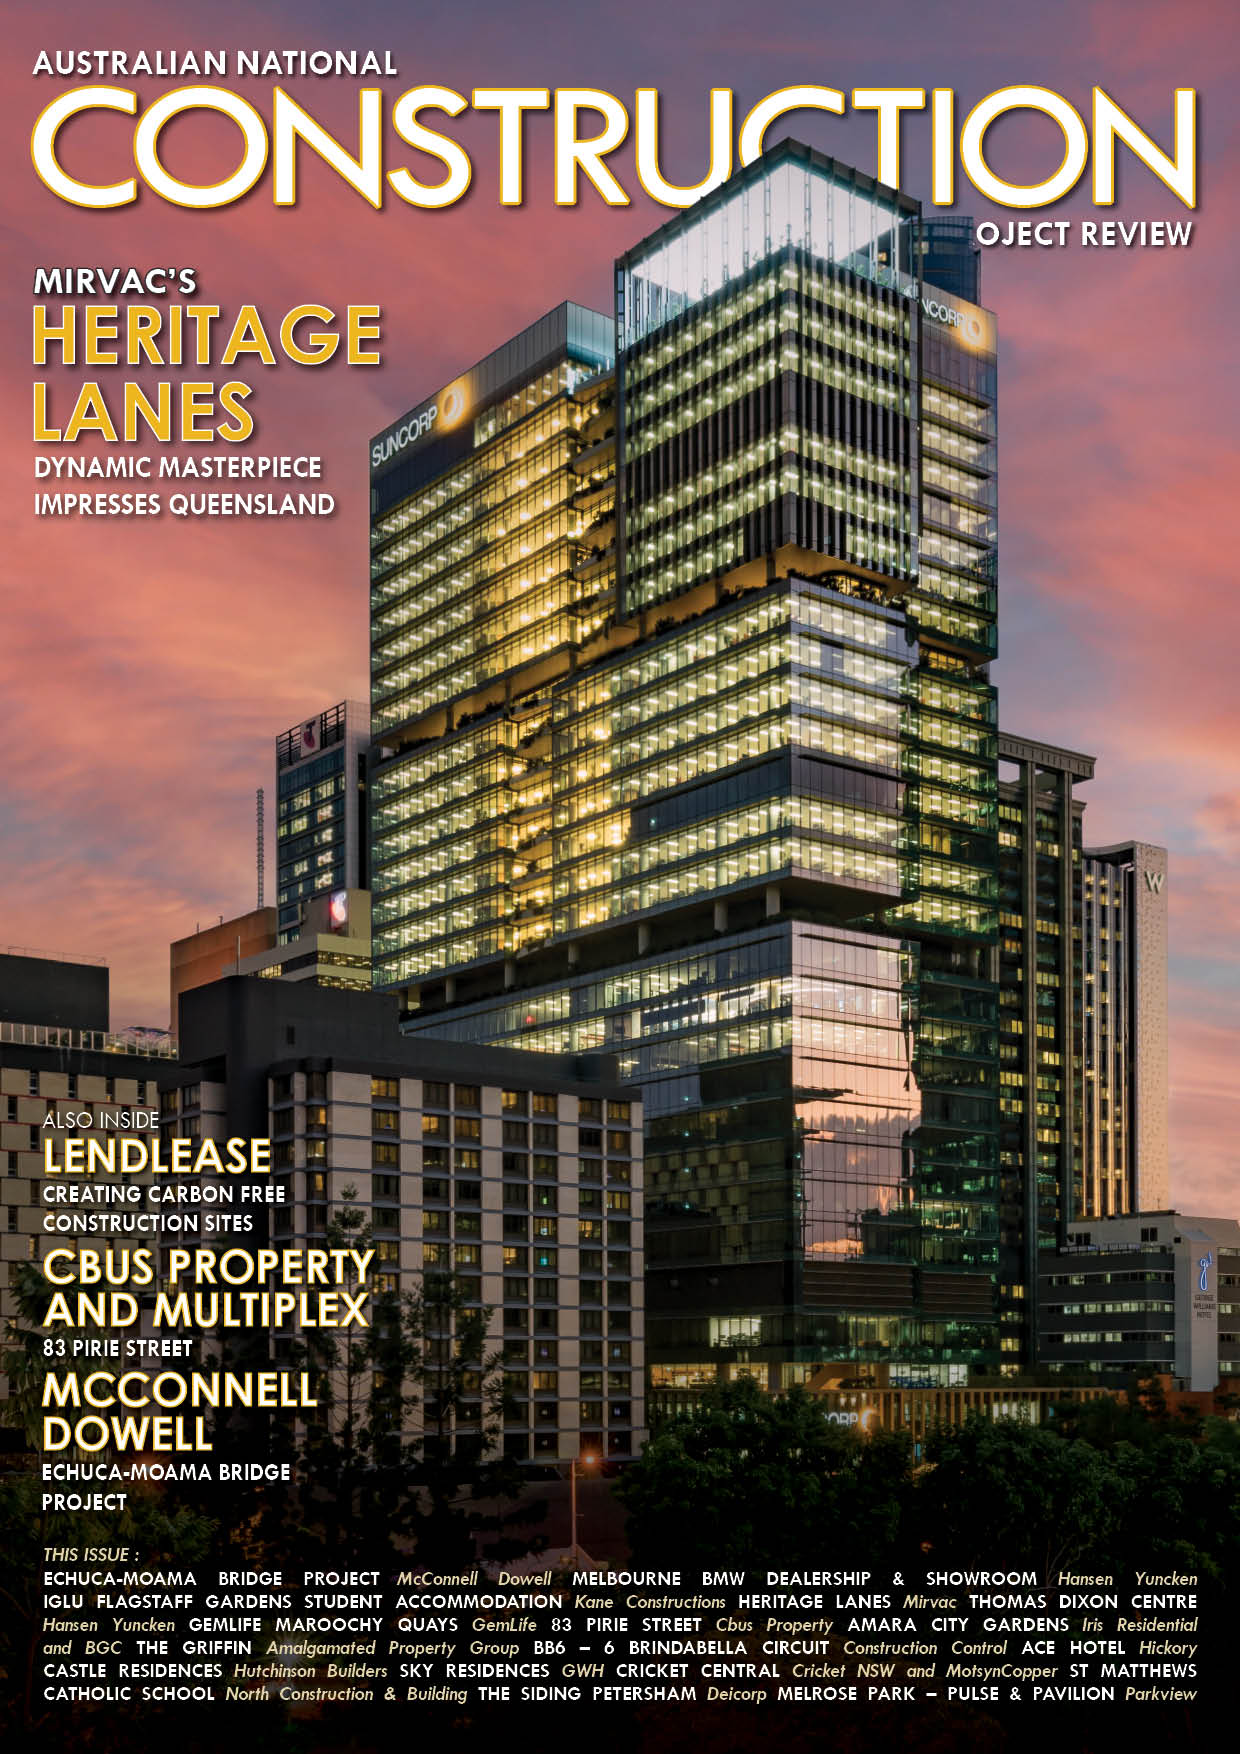 Front cover of the Australian national construction review magazine depicting the Heritage Lanes building at 80 Ann street Queensland, constructed by Mirvac. on a purple and orange sunset.